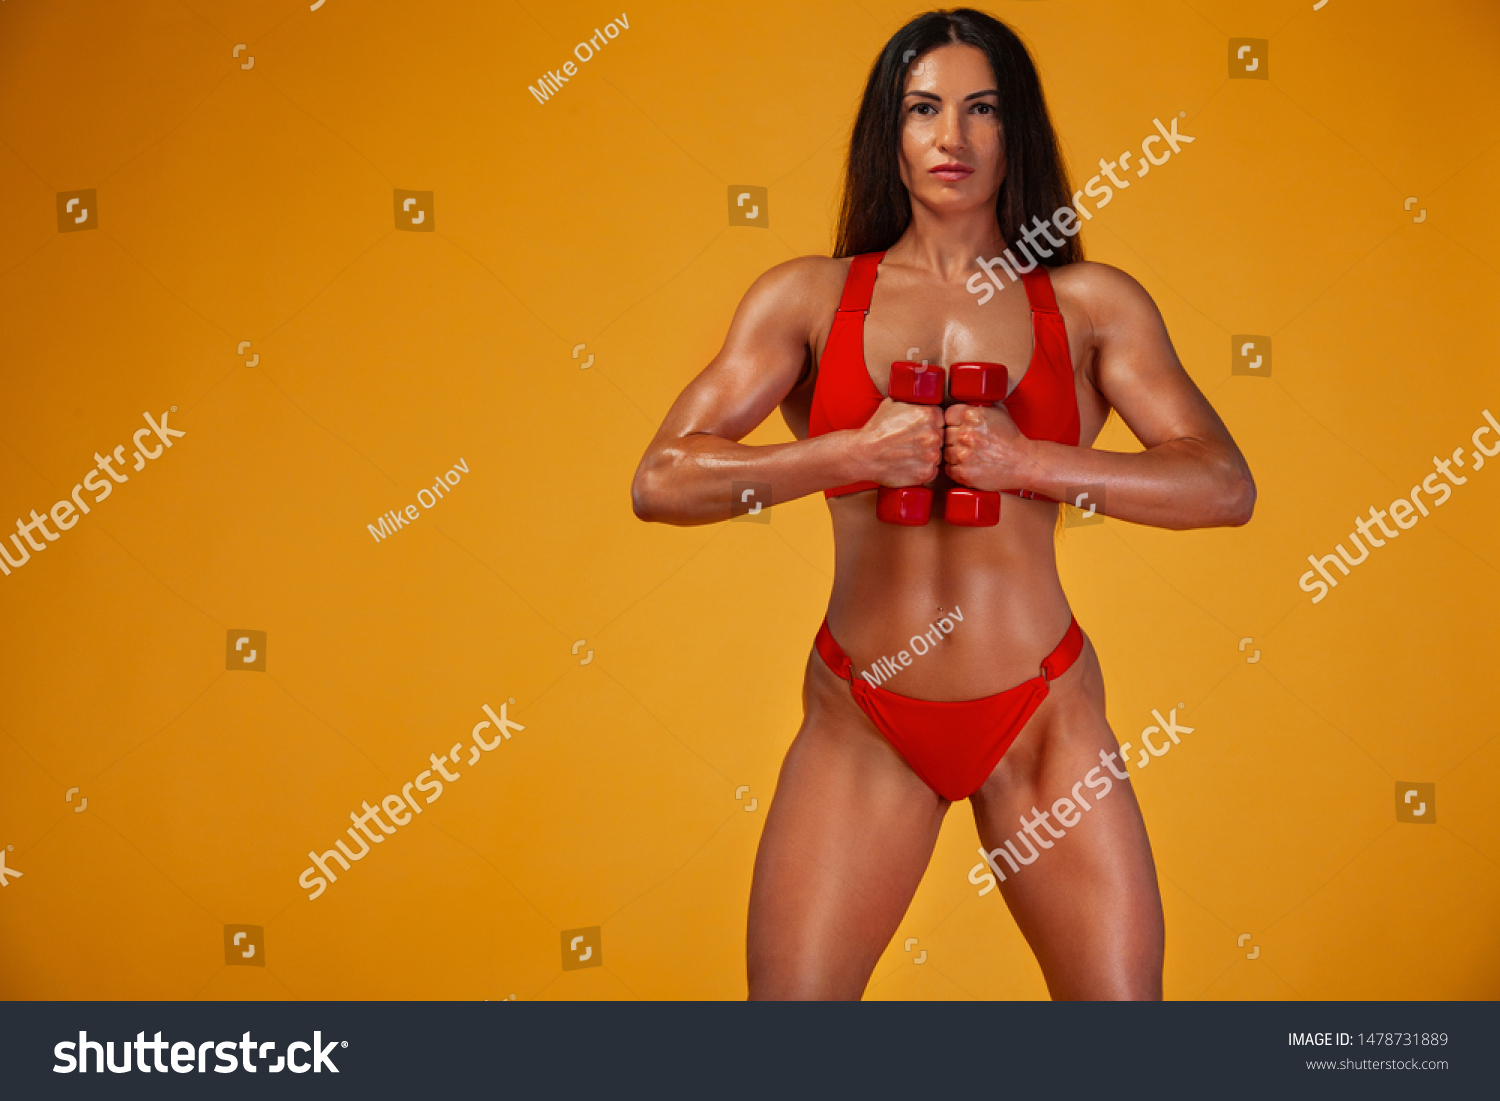 Strong muscular bodybuilder athletic woman pumping up muscles with dumbbells on yellow background. Individual sports recreation. #1478731889